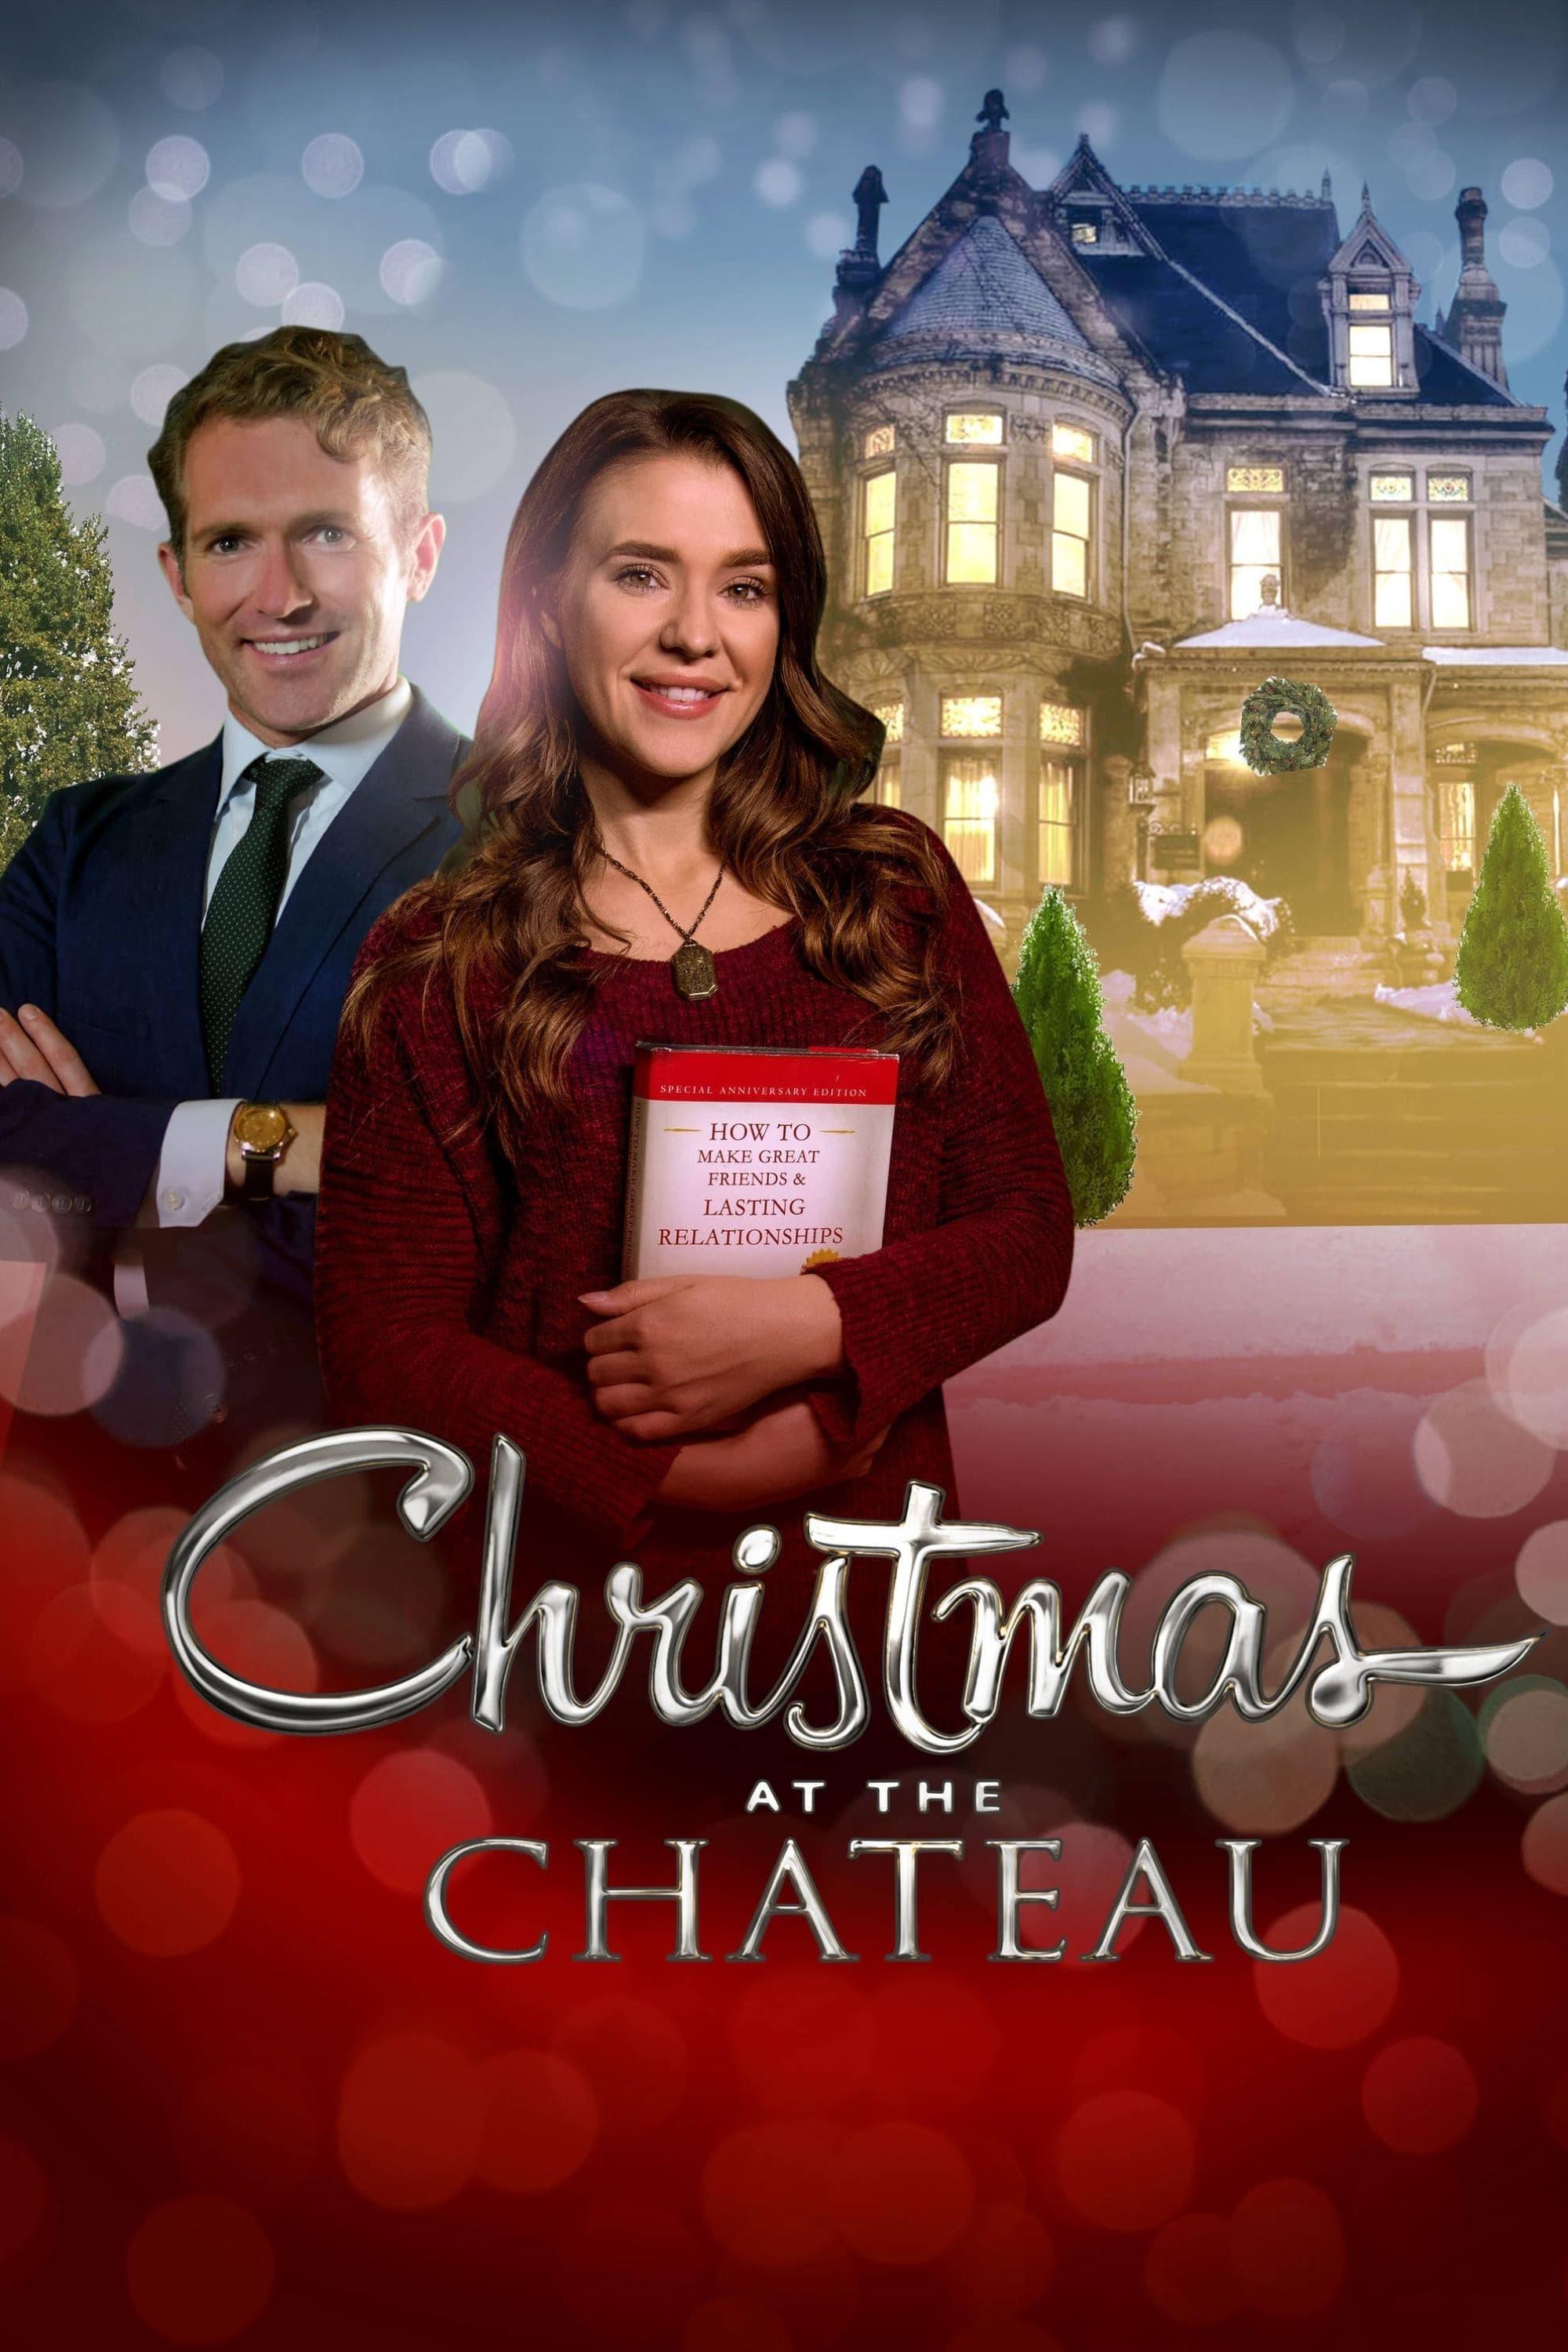 Christmas at the Chateau poster